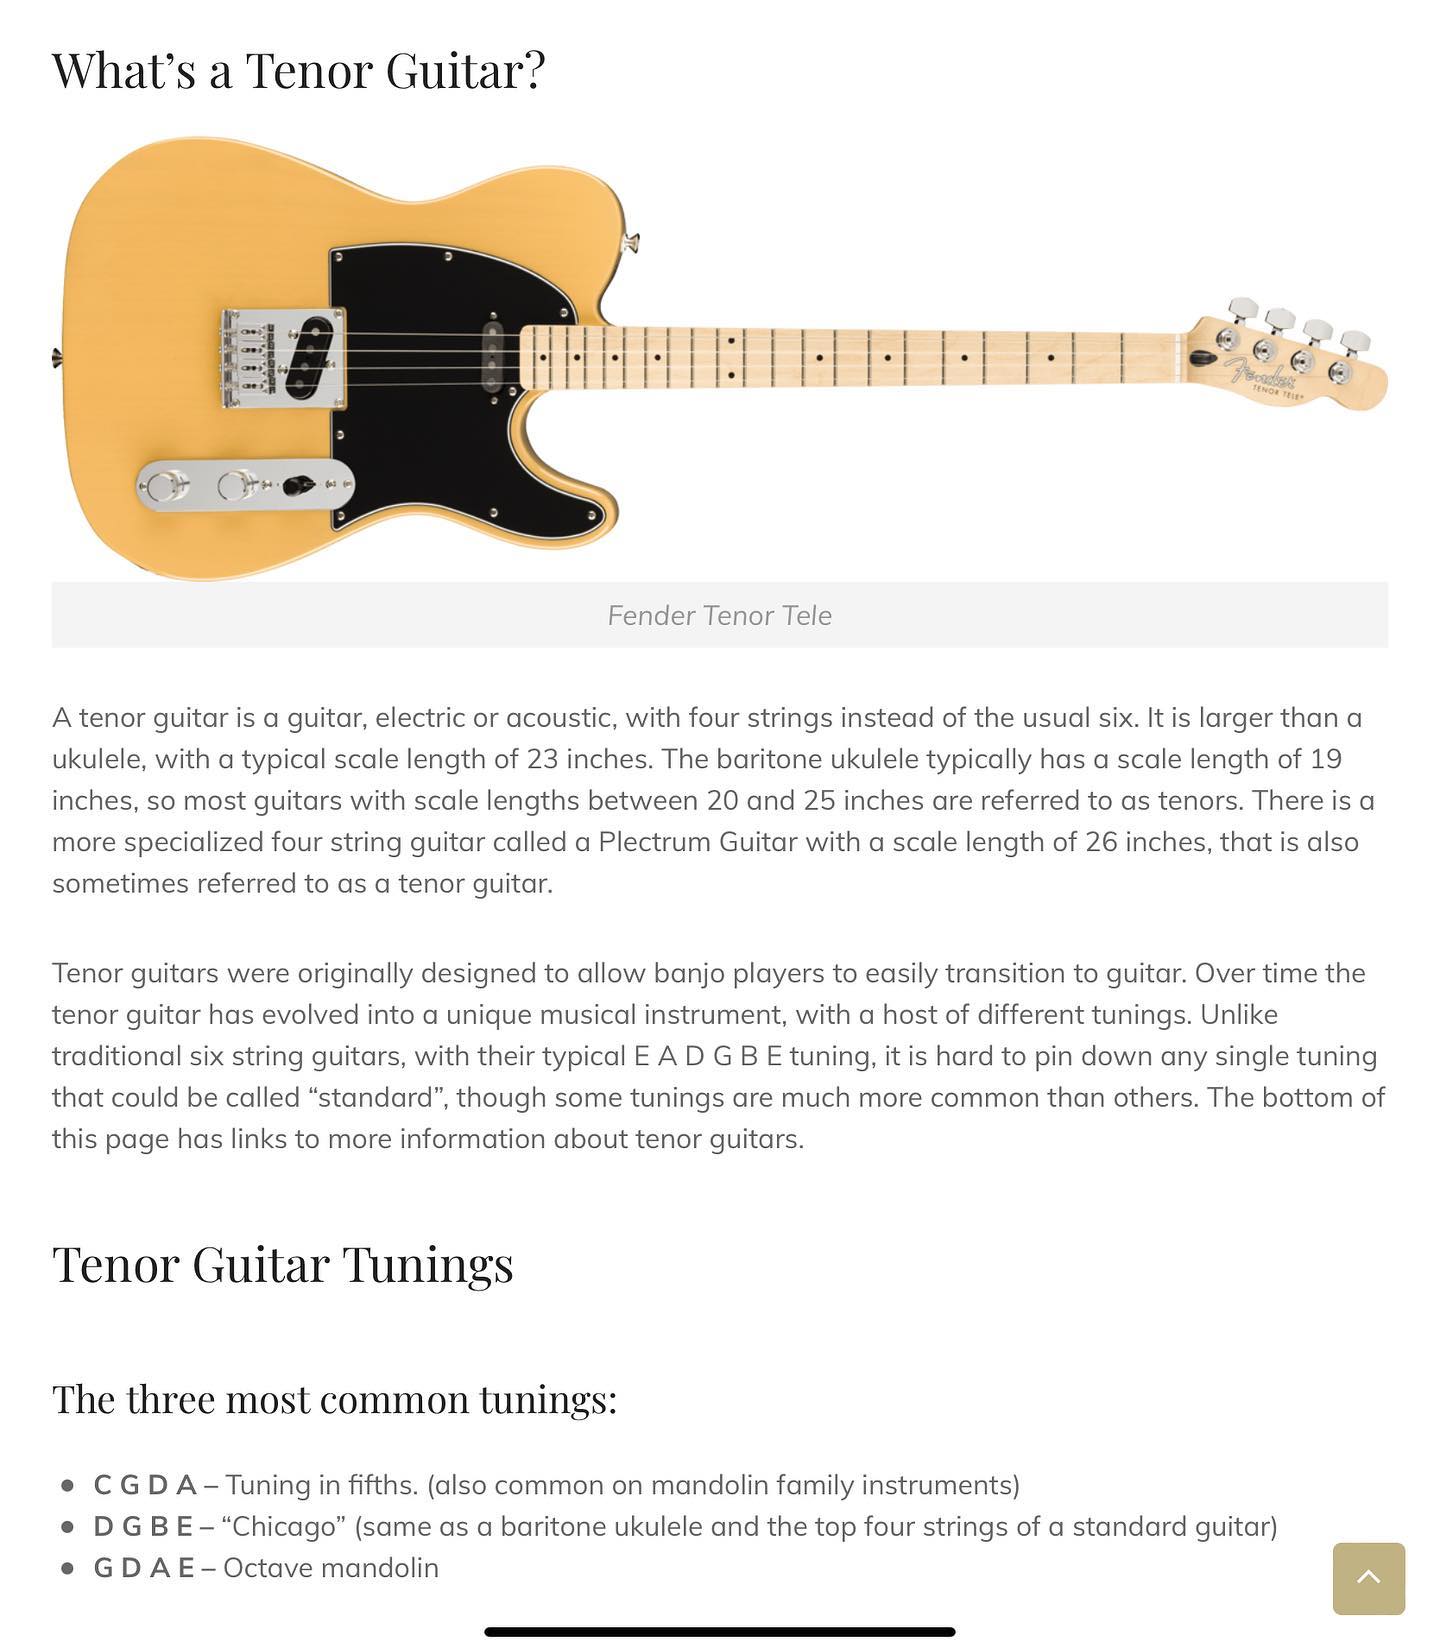 If you’re interested in #TenorGuitar you might like this #tunings page I put together at PapaDafoe.com